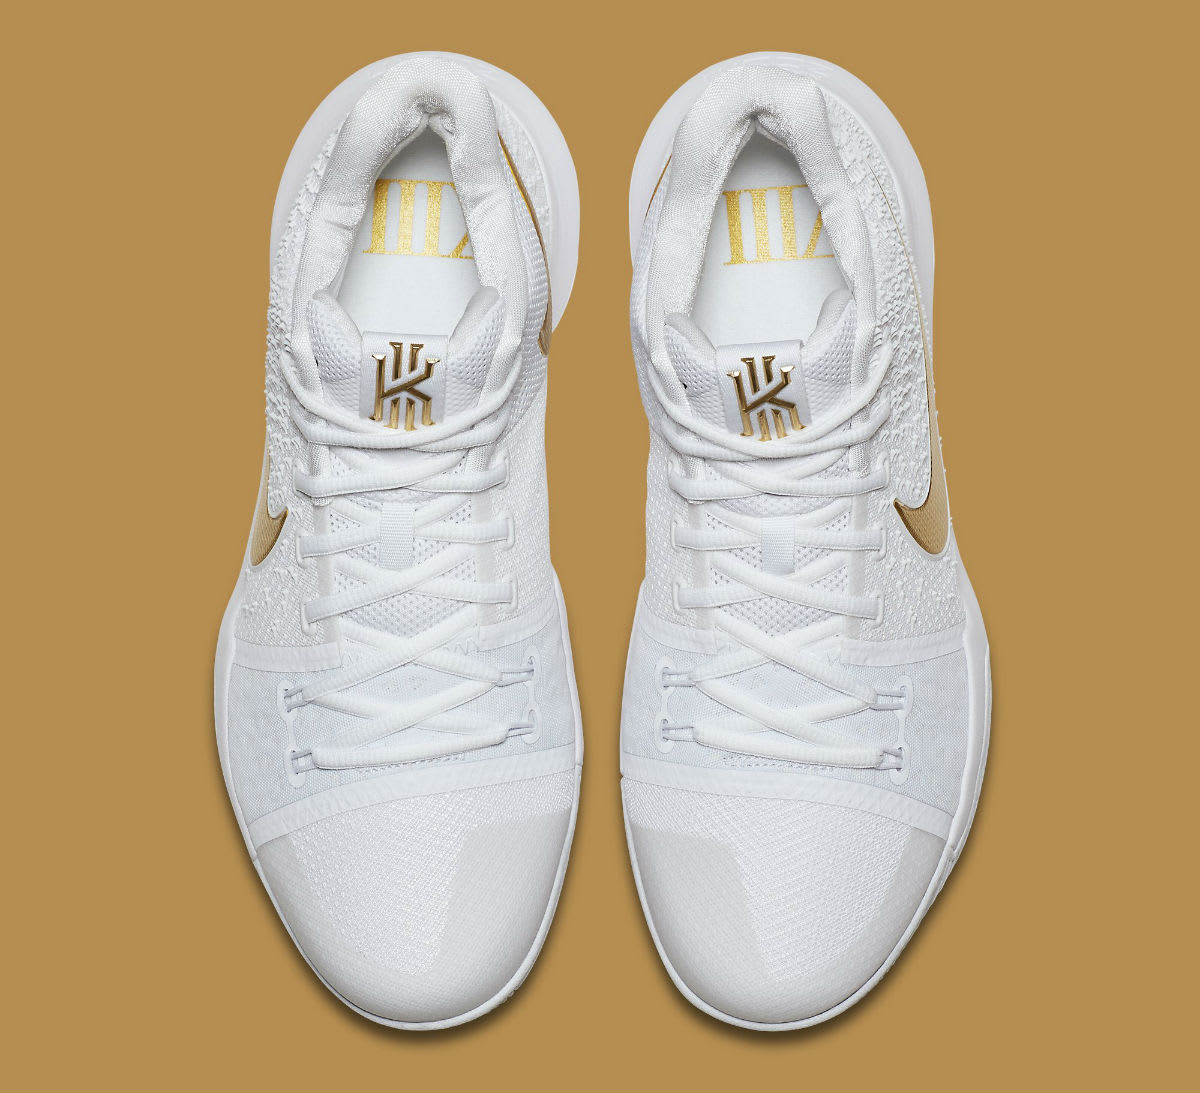 Nike Kyrie 3 White/Gold Release Date Top 852396-902